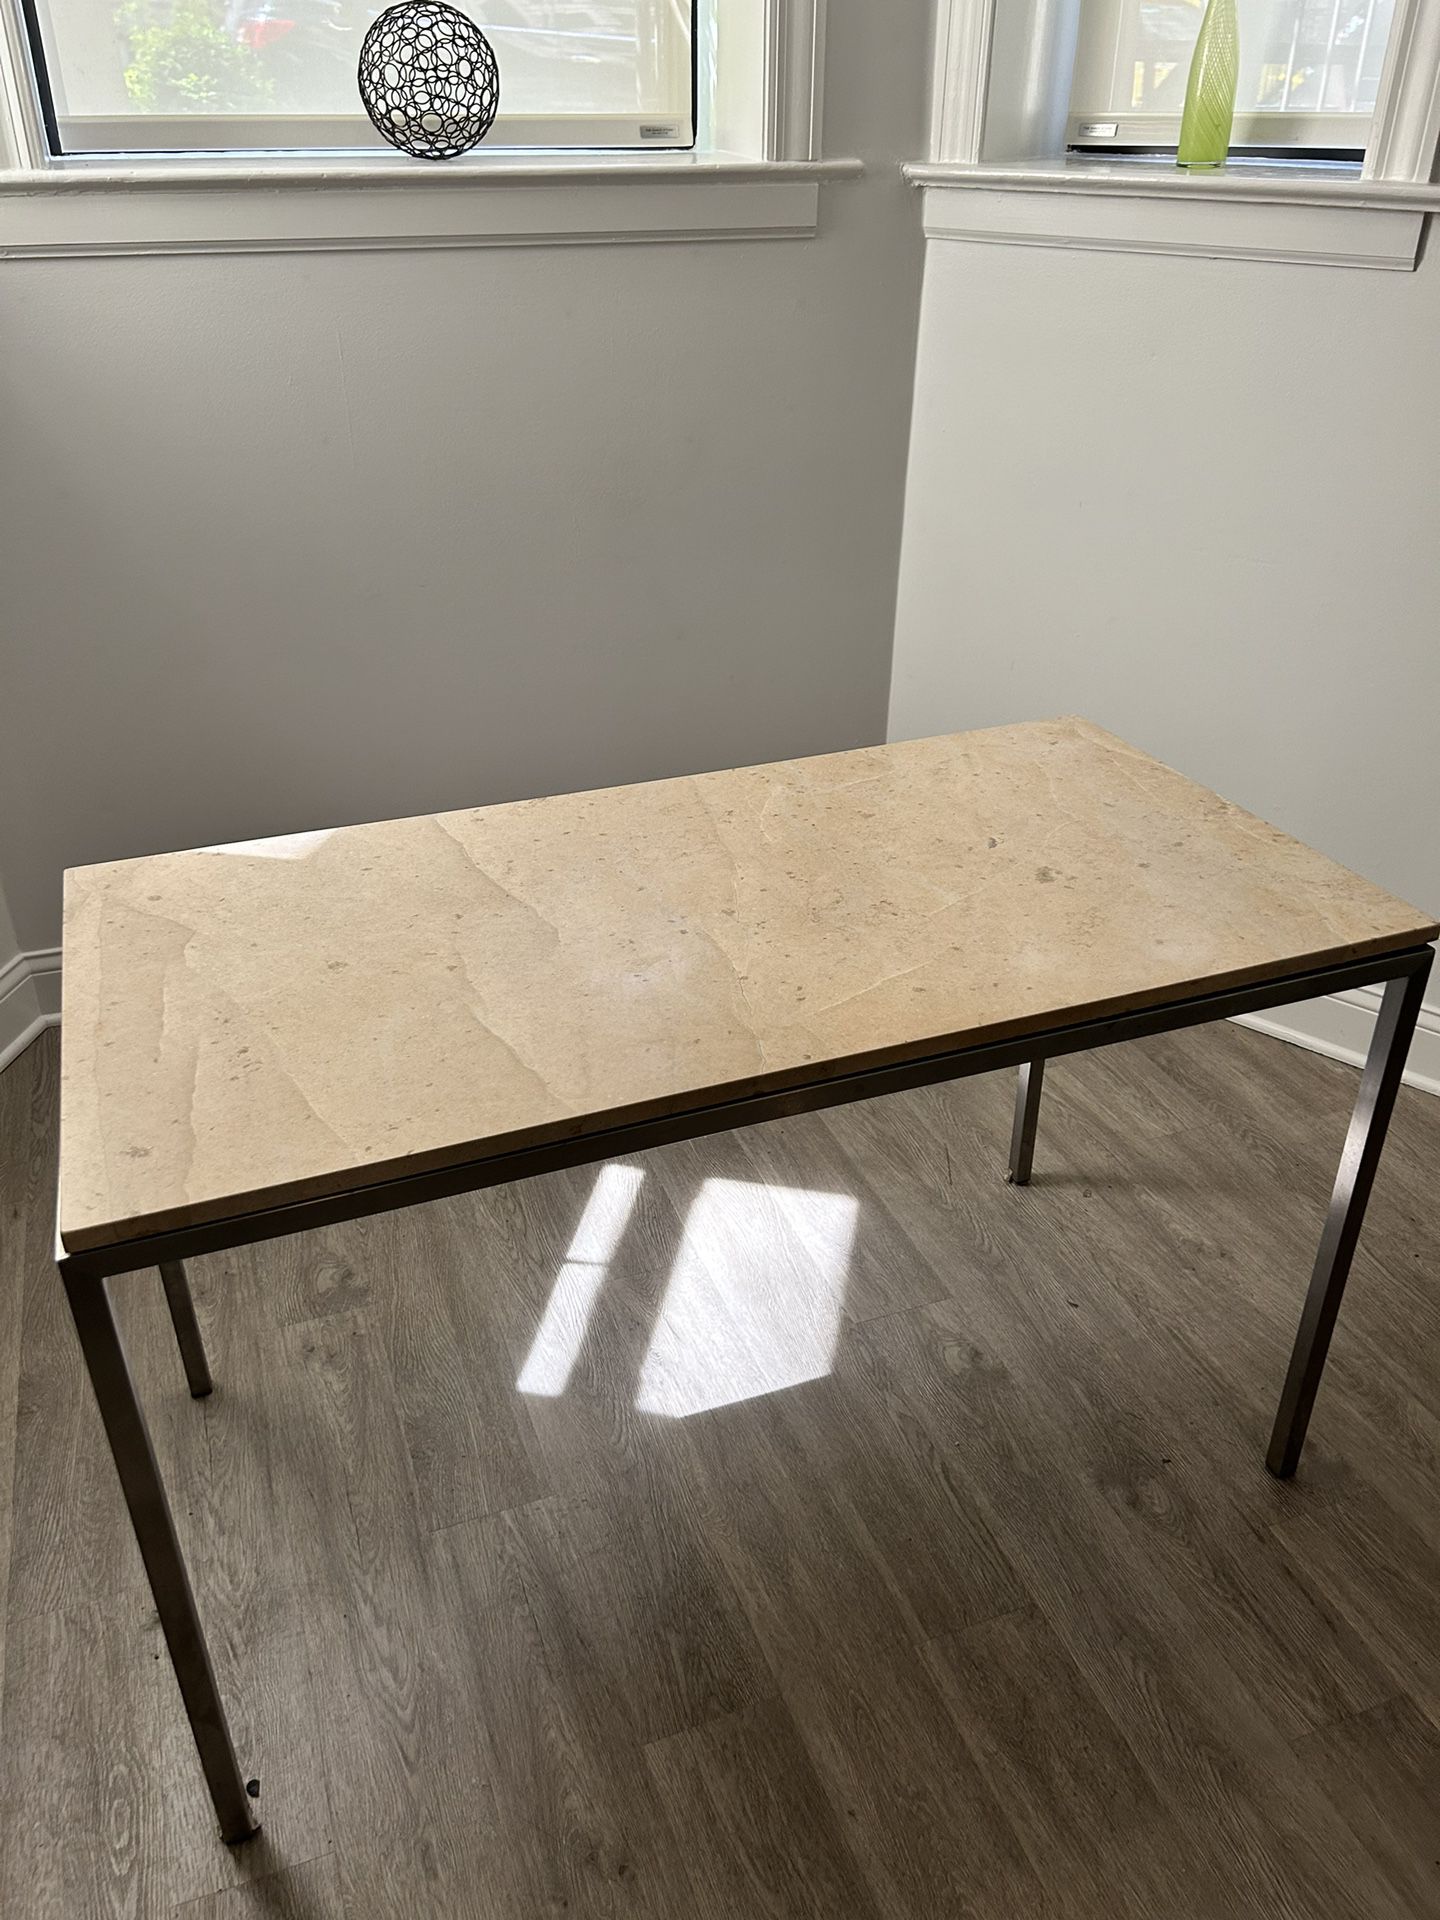 Metal/Wooden Kitchen Table